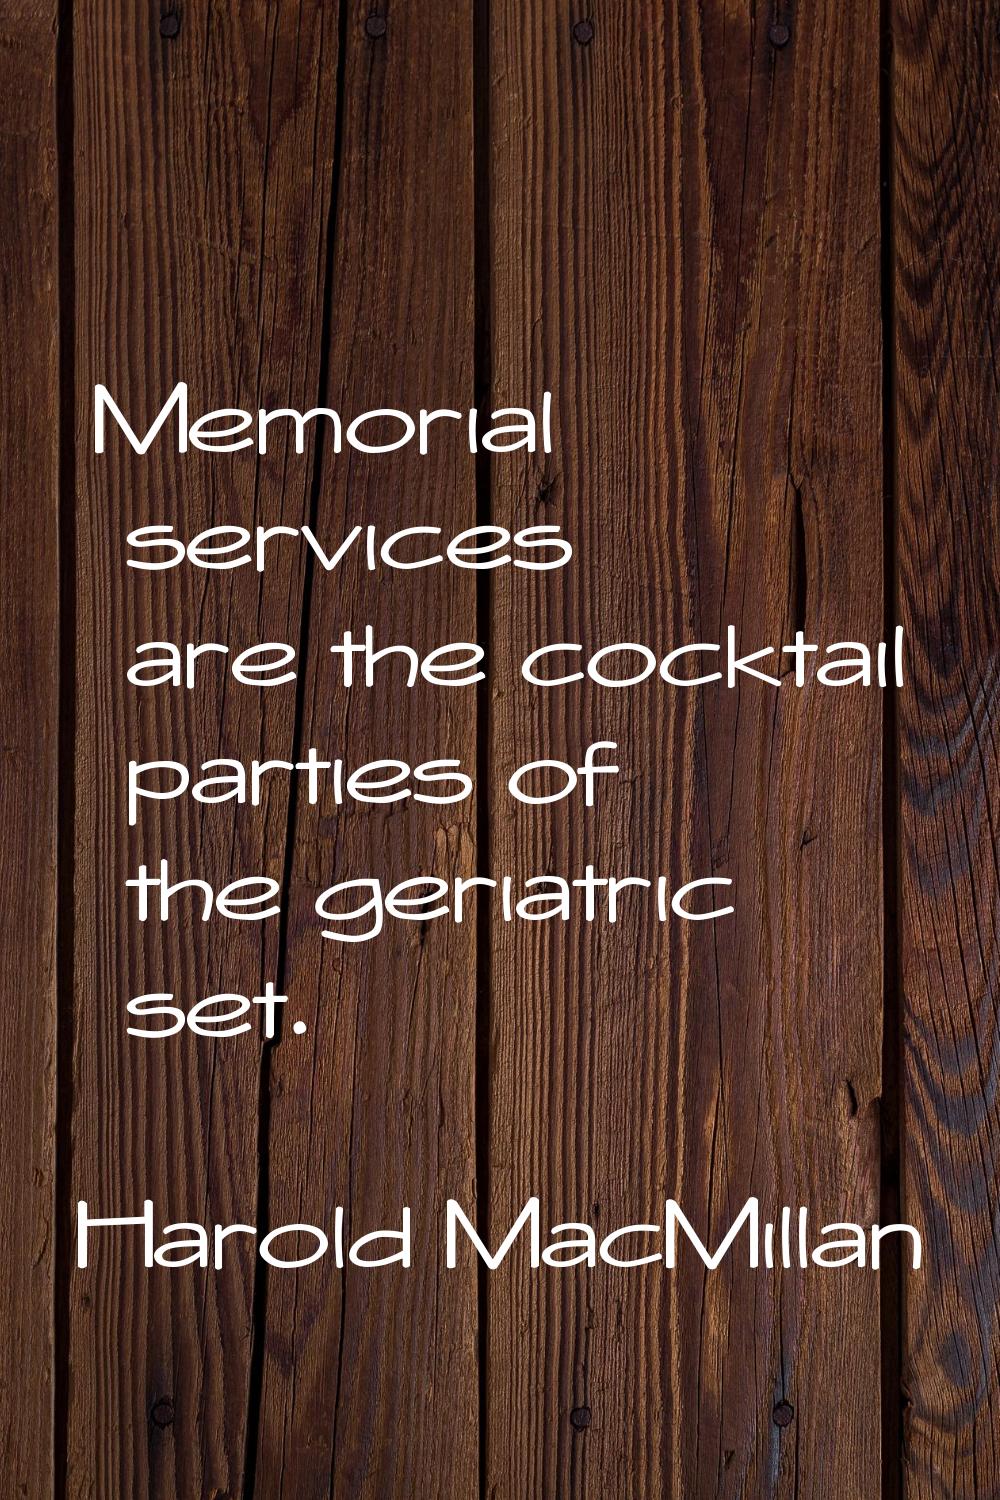 Memorial services are the cocktail parties of the geriatric set.